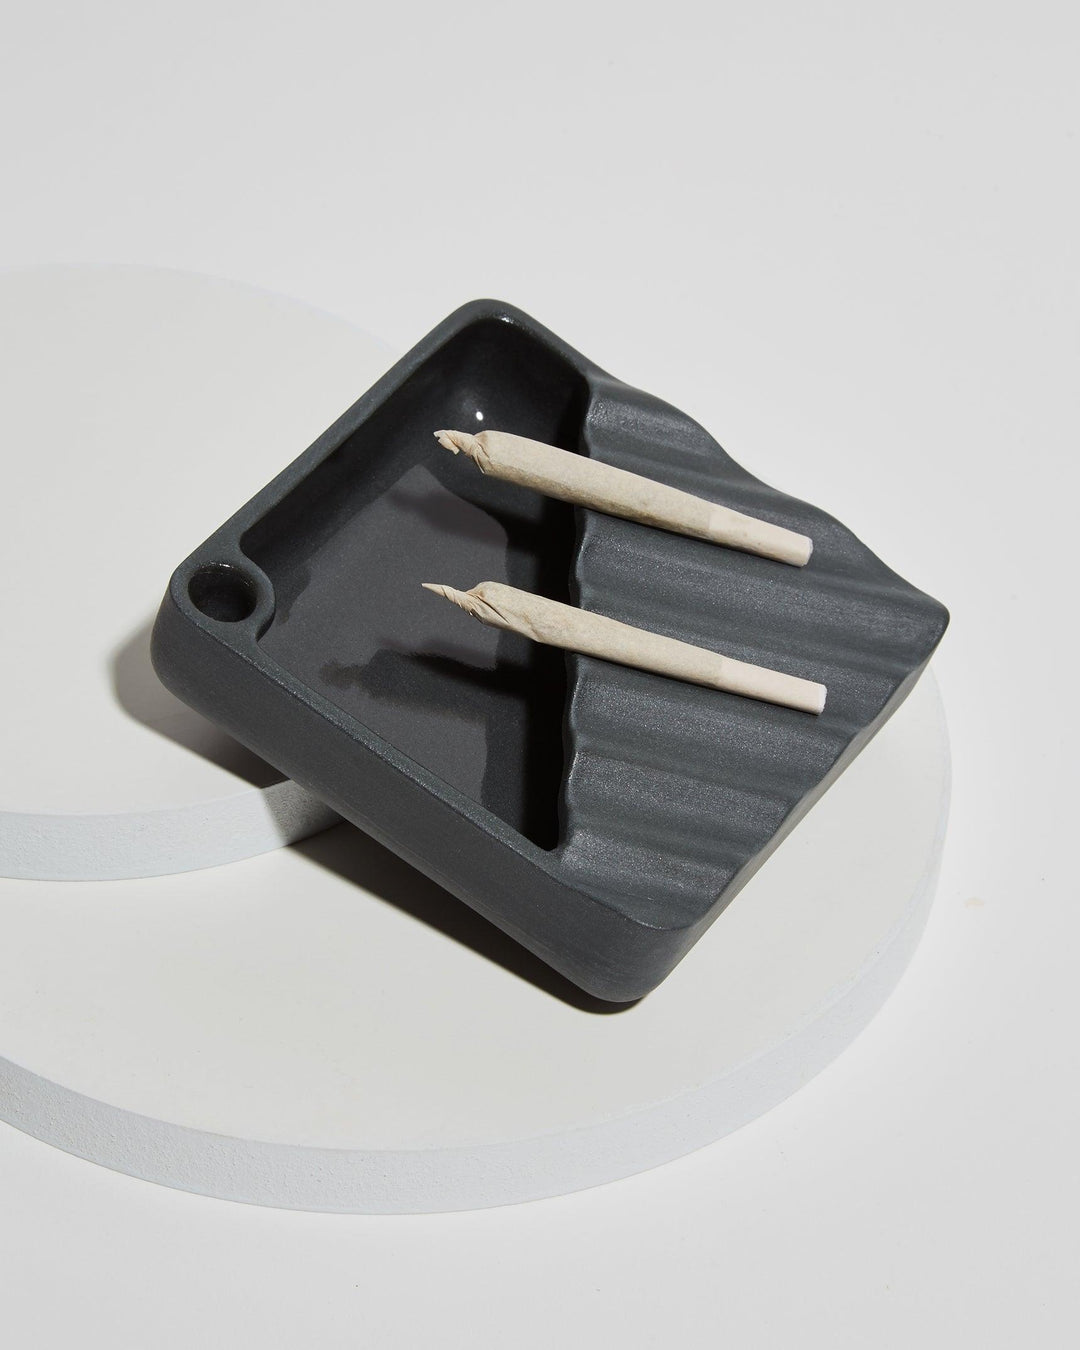 Two cannabis joints resting on a black ceramic ashtray. 